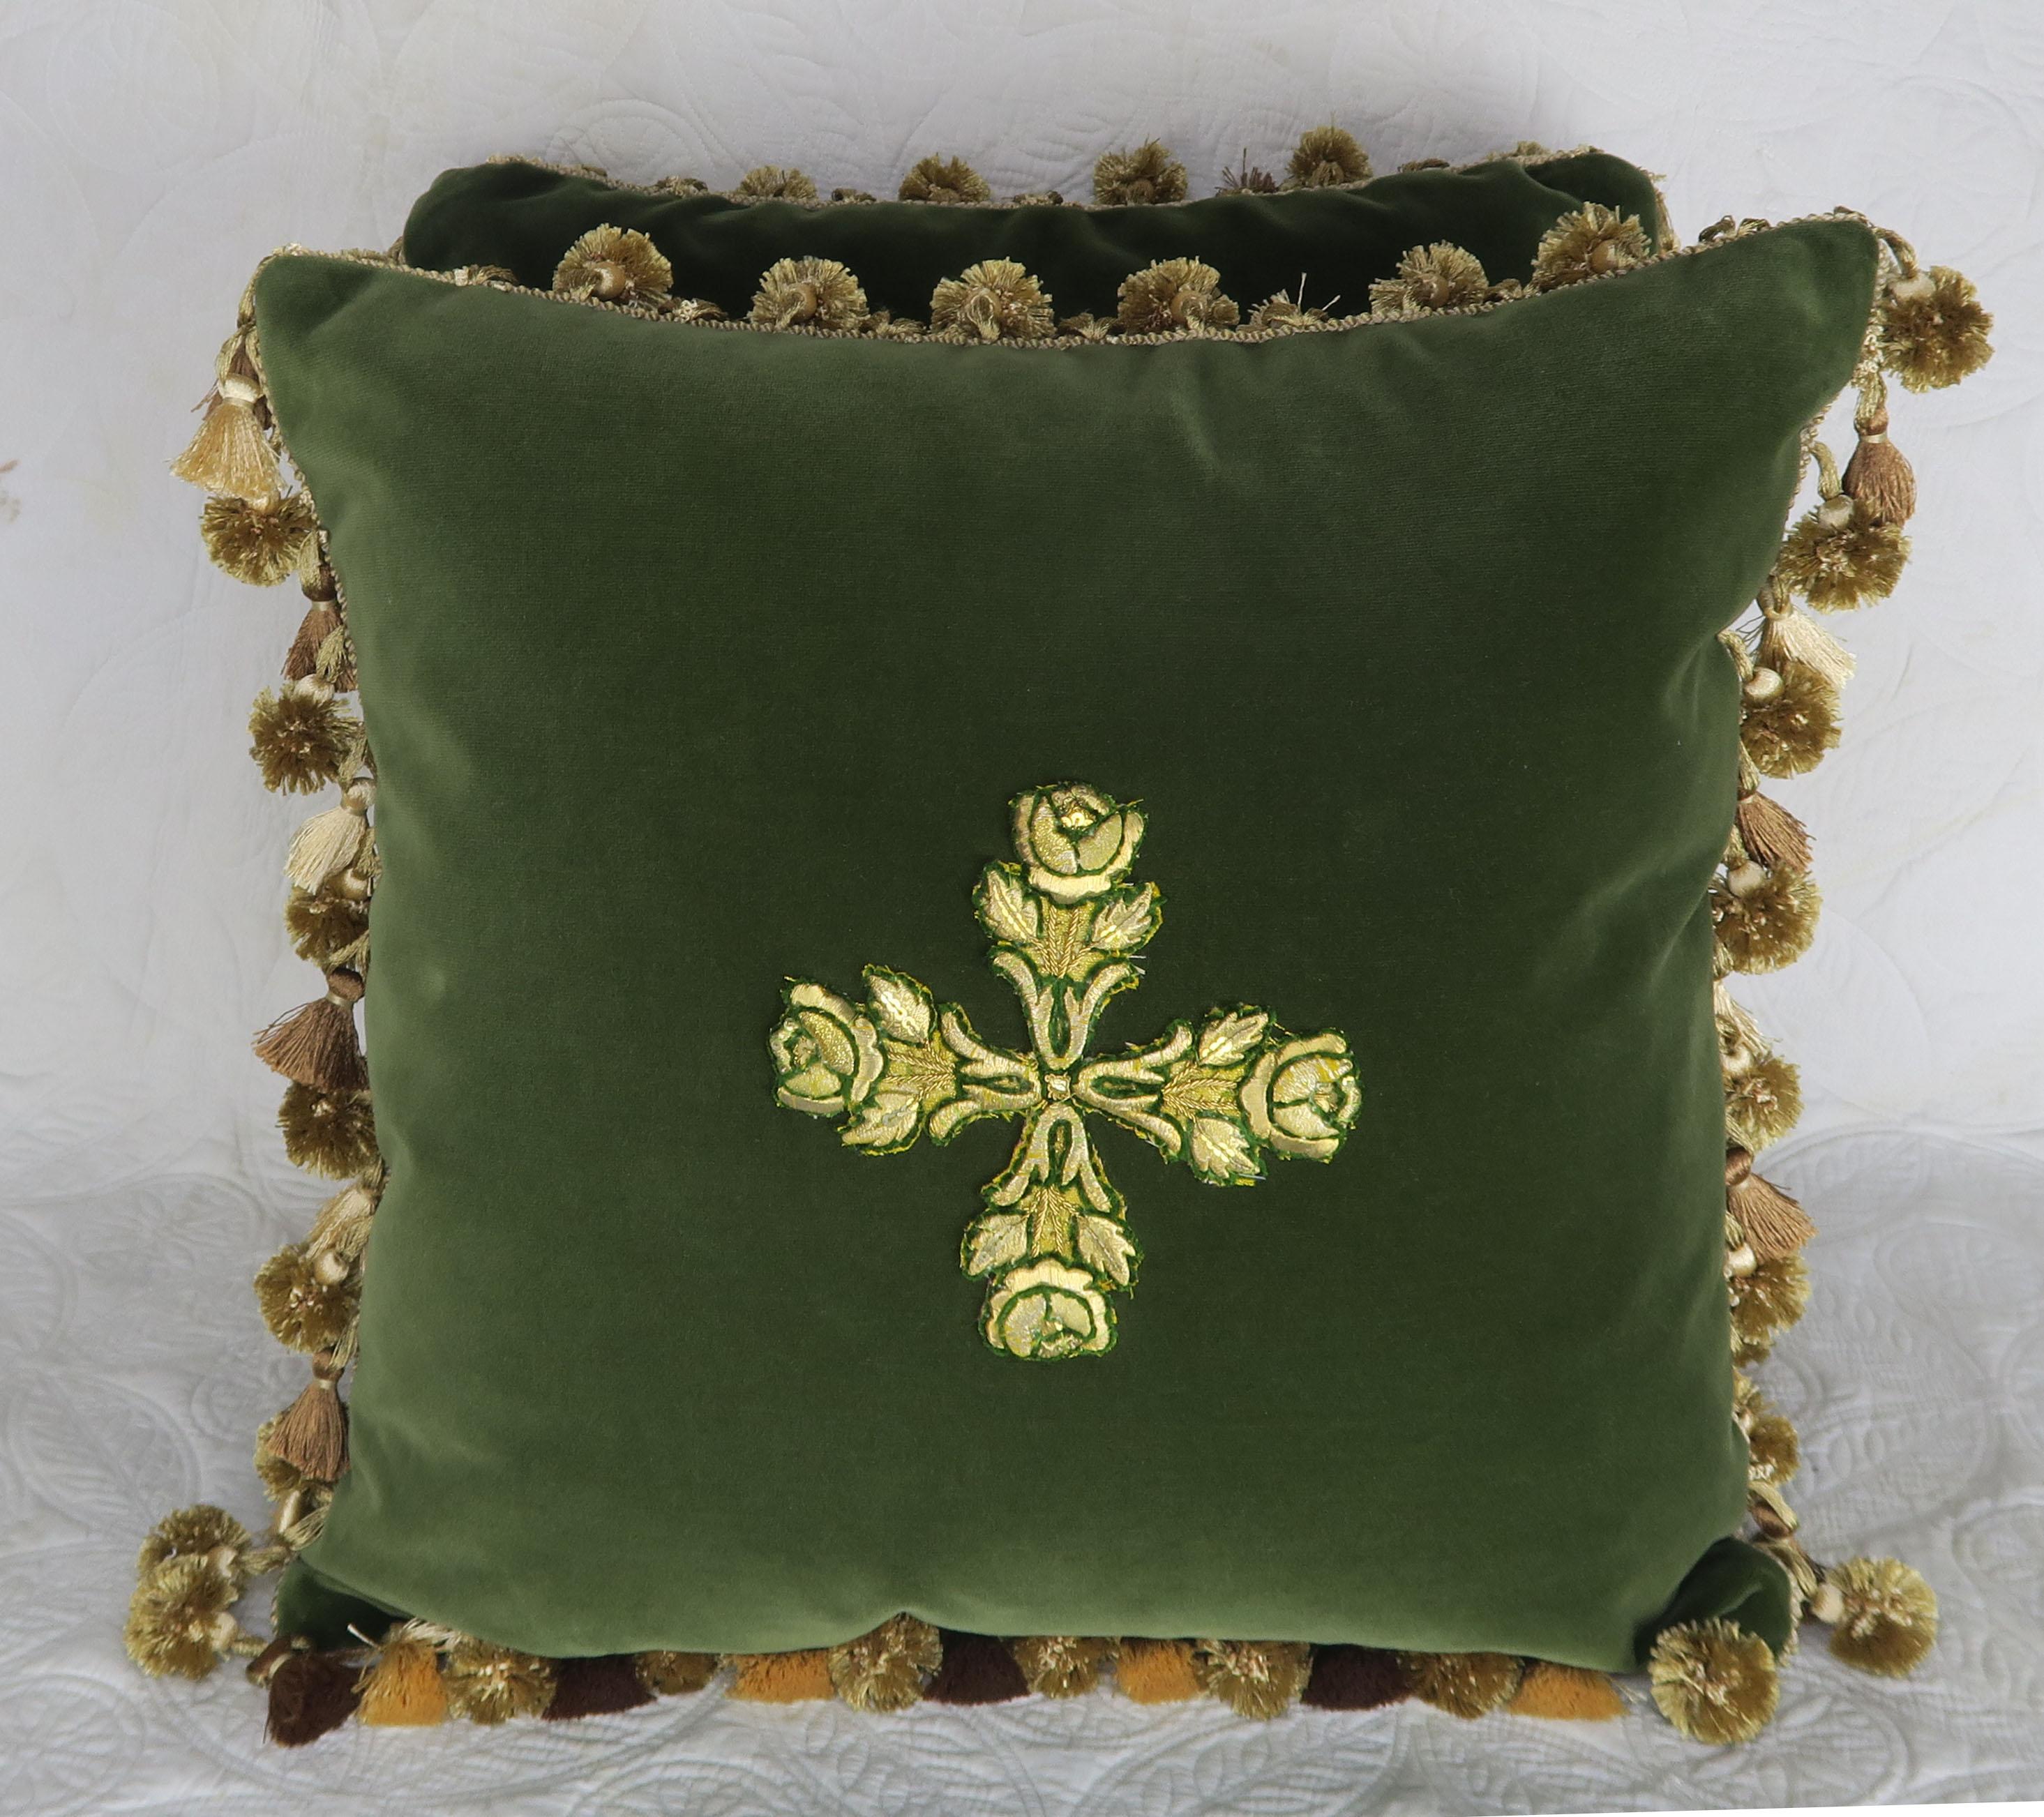 Pair of custom pillows made with 19th century gold metallic appliques sewn on contemporary emerald green velvet front with a lighter green silk back. Multicolored green and gold tassel fringe around the perimeter of pillows. Down inserts, sewn